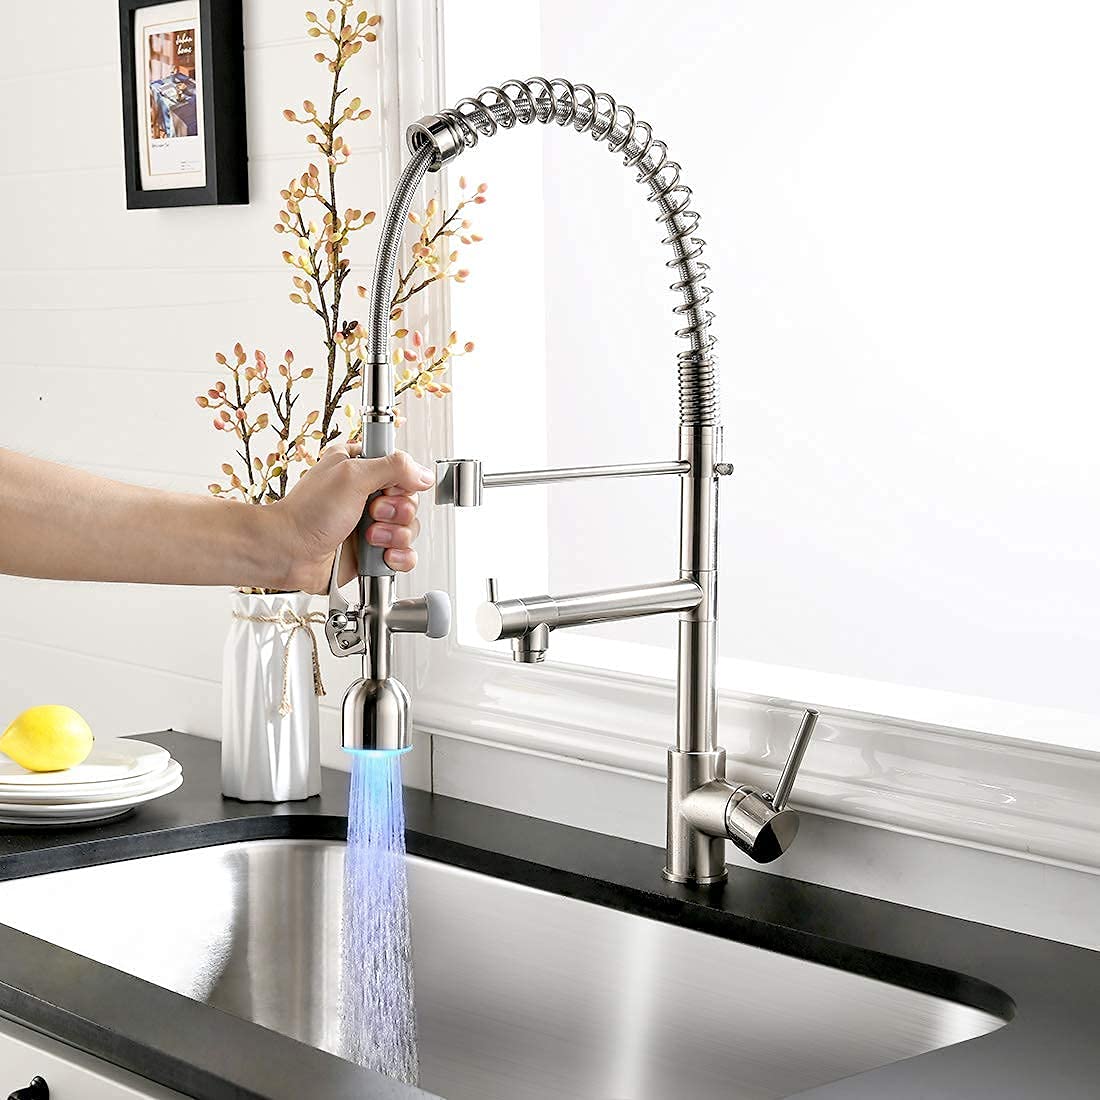 Fapully LED Kitchen Faucet Pull Down Sprayer and Deck Plate Brushed Nickel